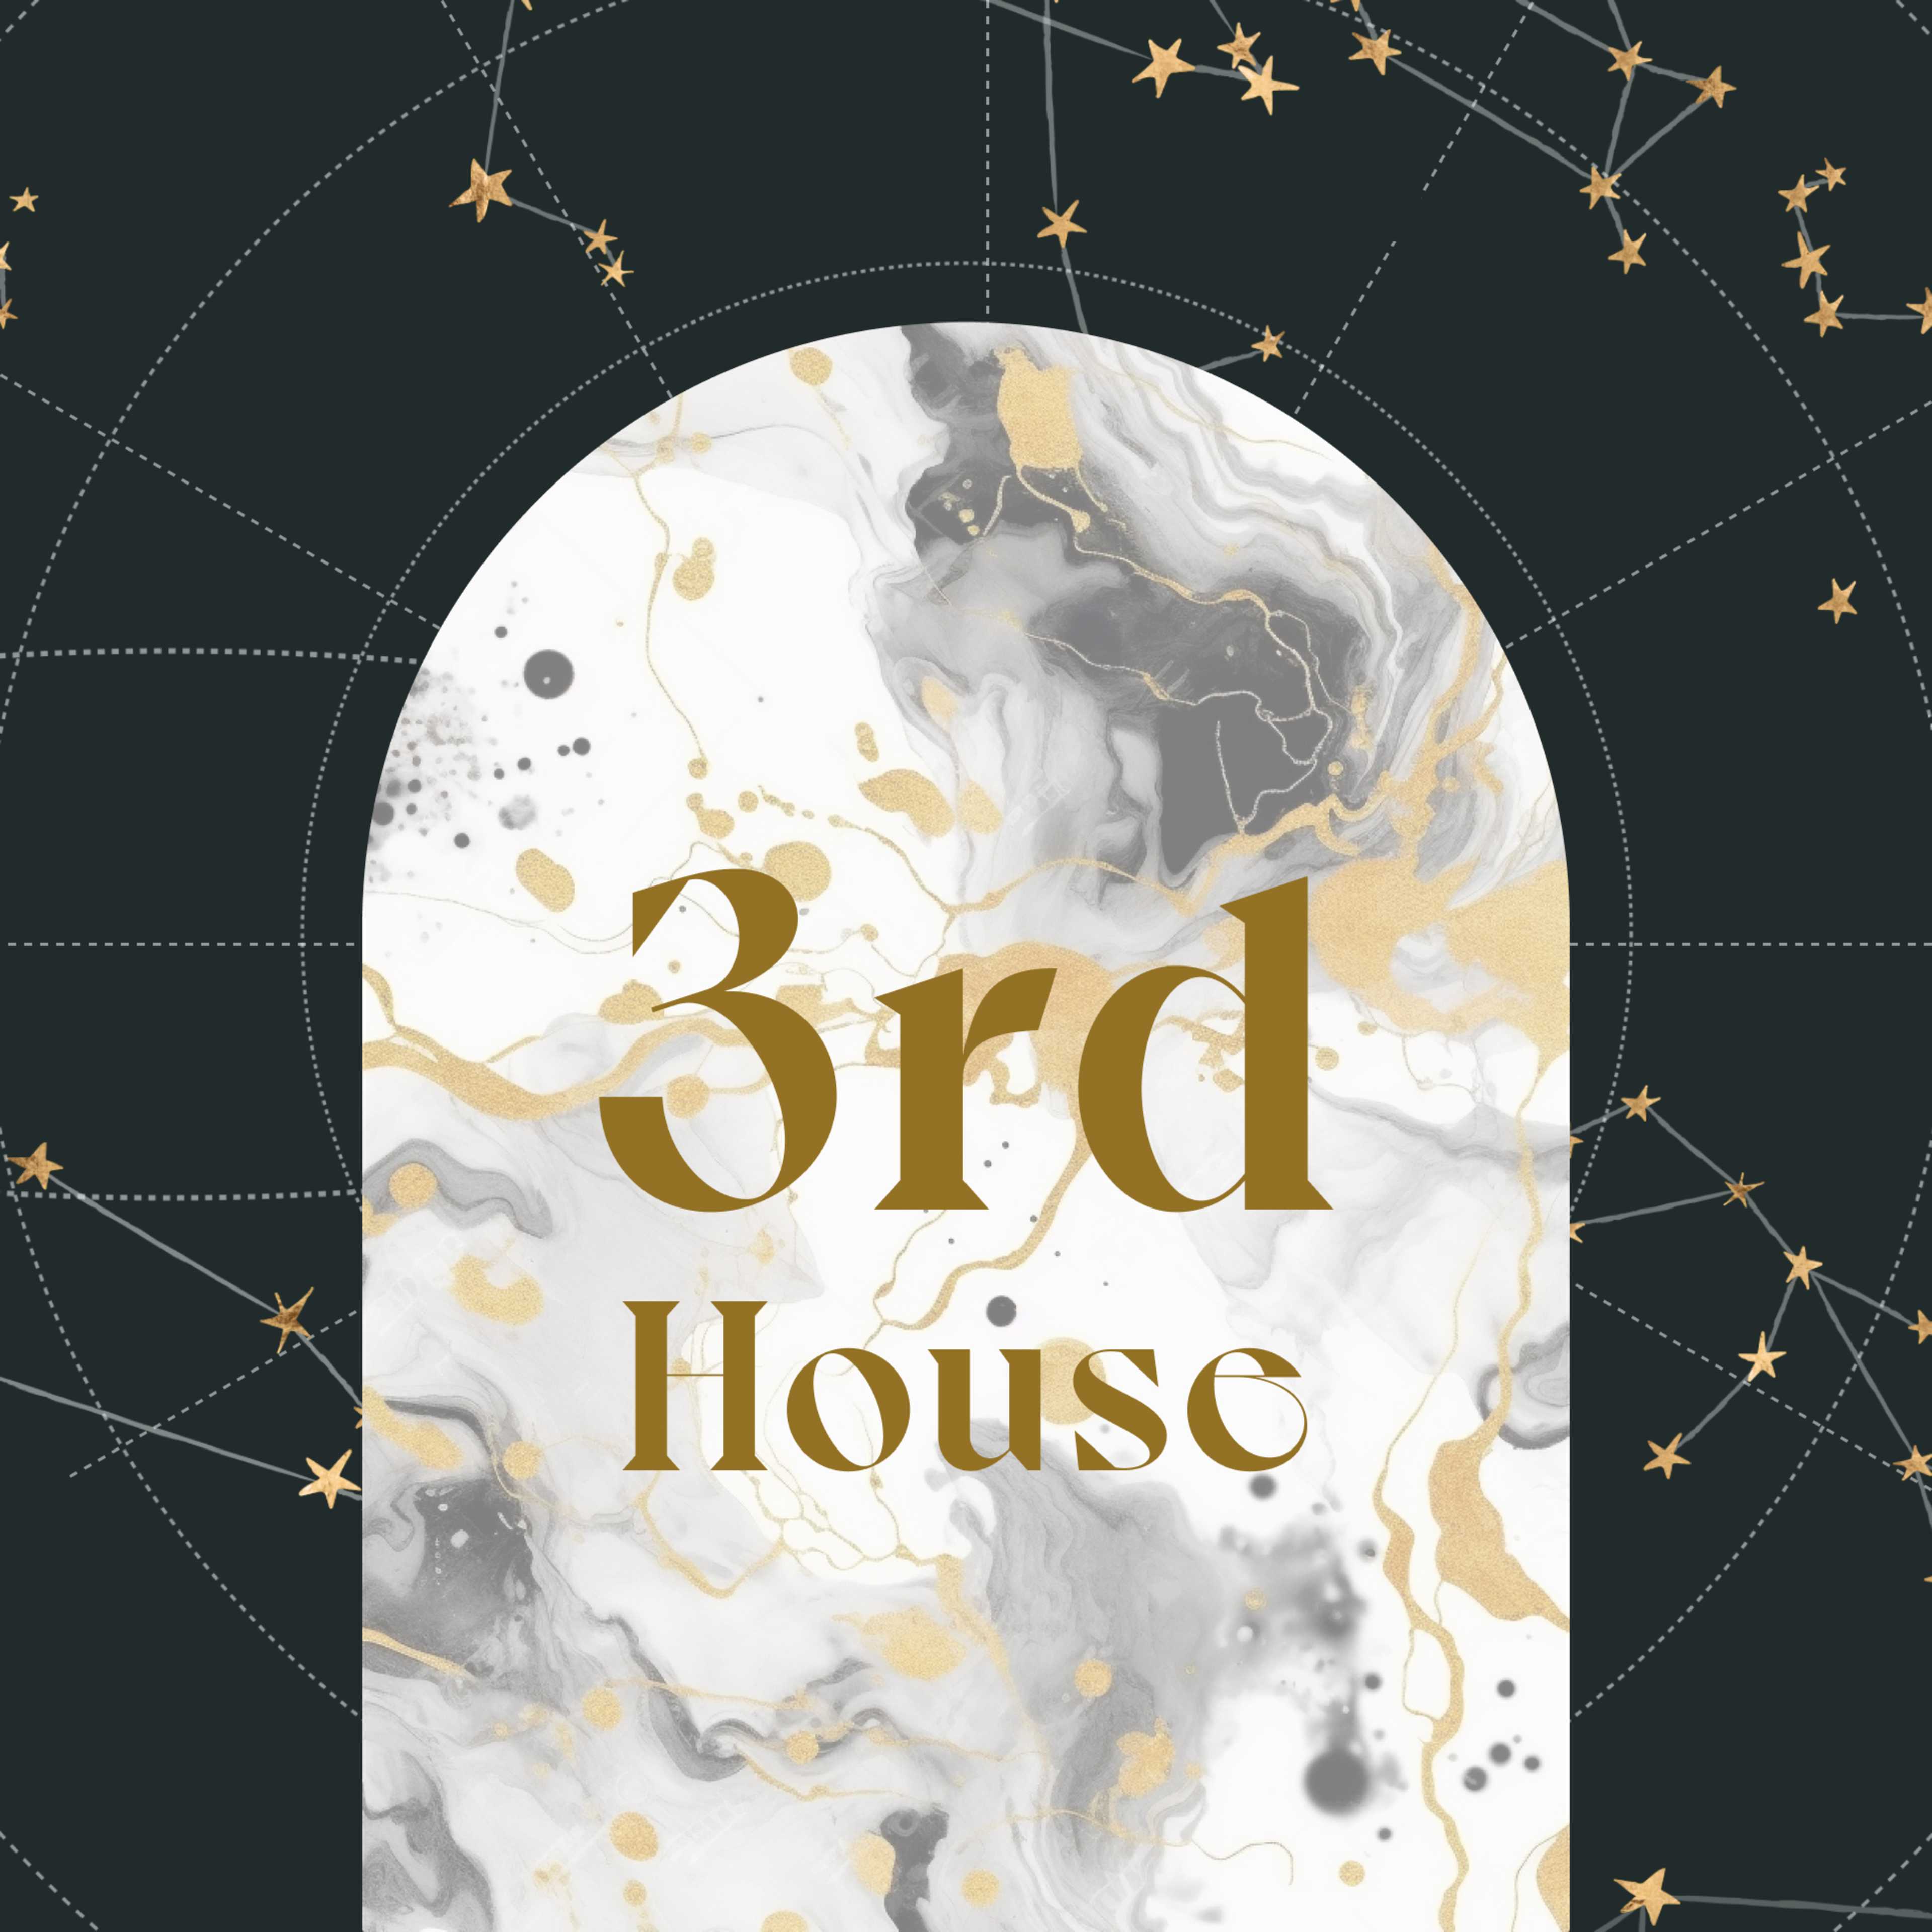 Third House in Astrology